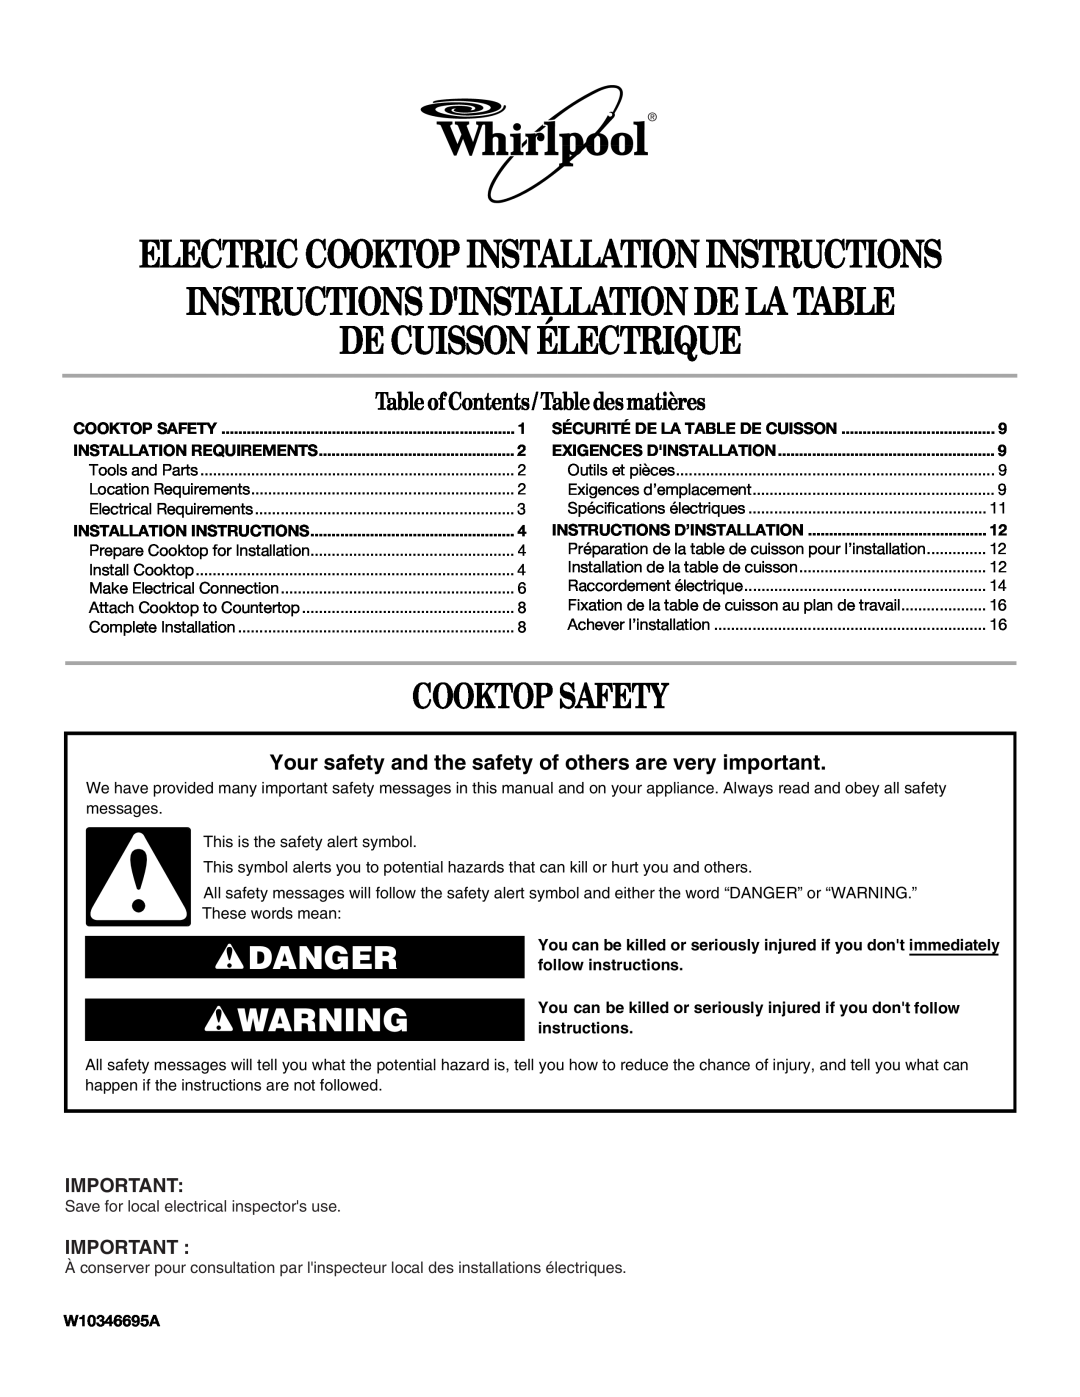 Whirlpool W10346695A installation instructions Cooktop Safety, Danger, Instructions Dinstallation De La Table 